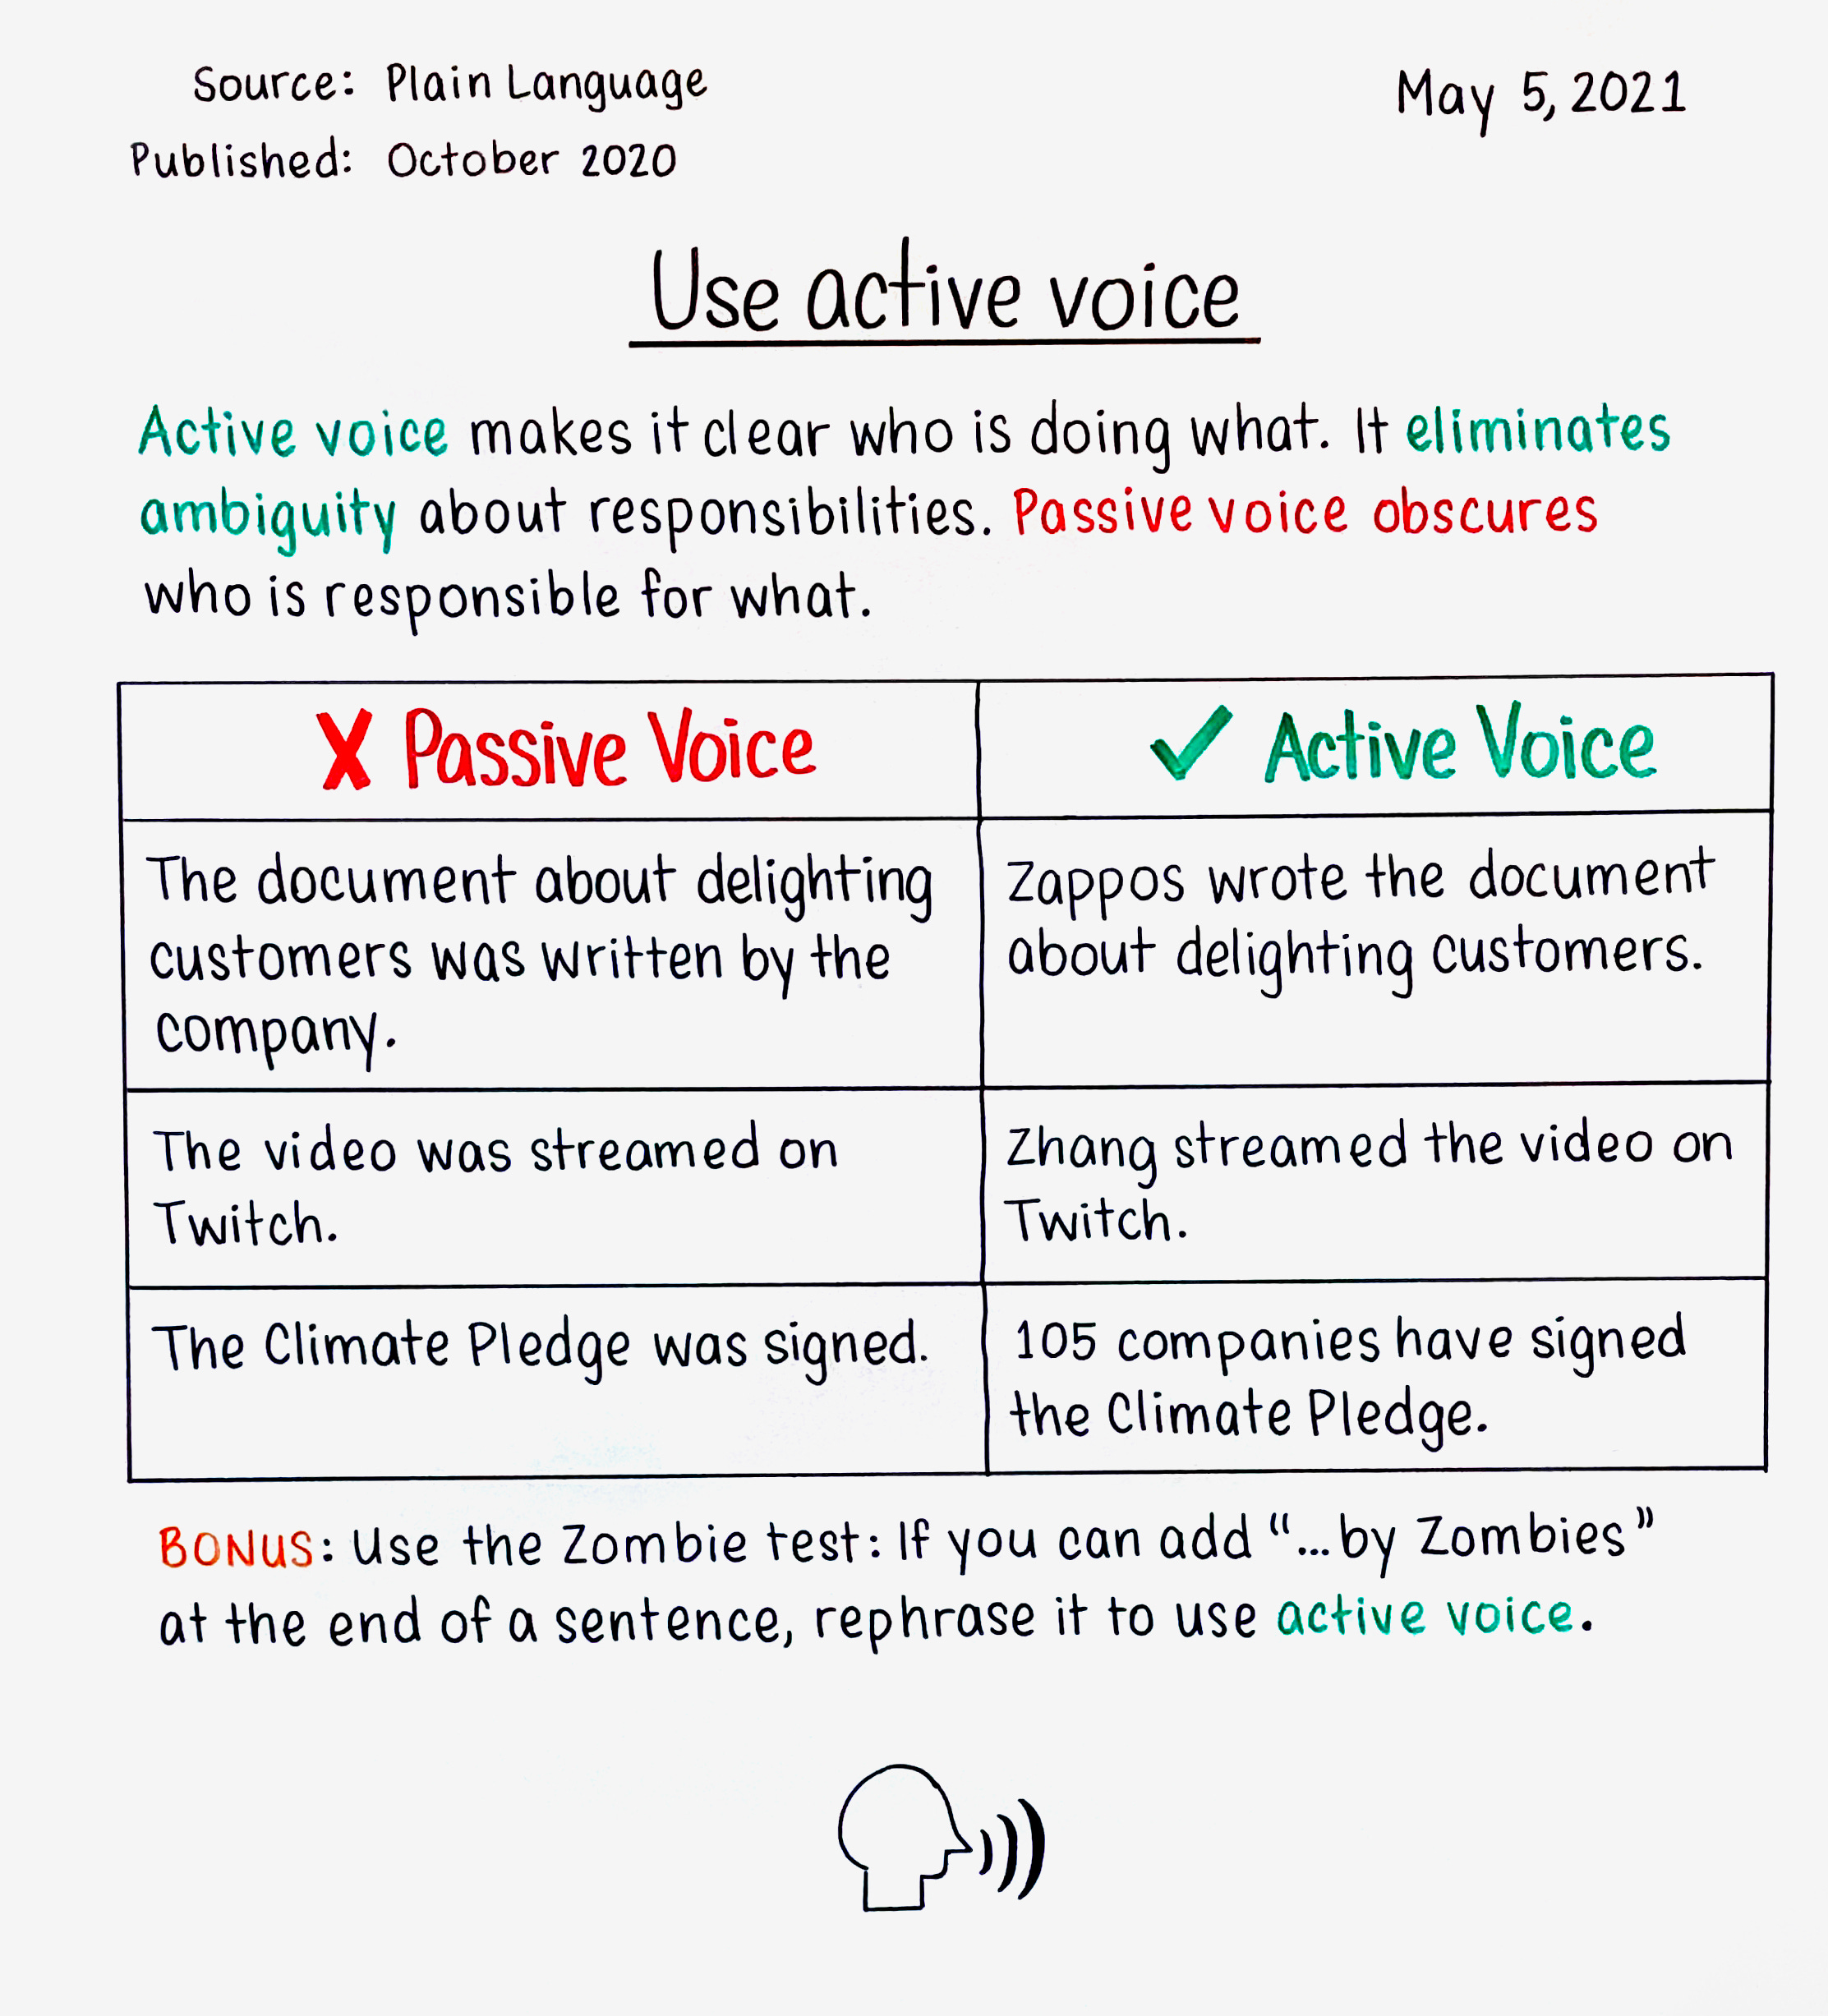 what does active voice mean